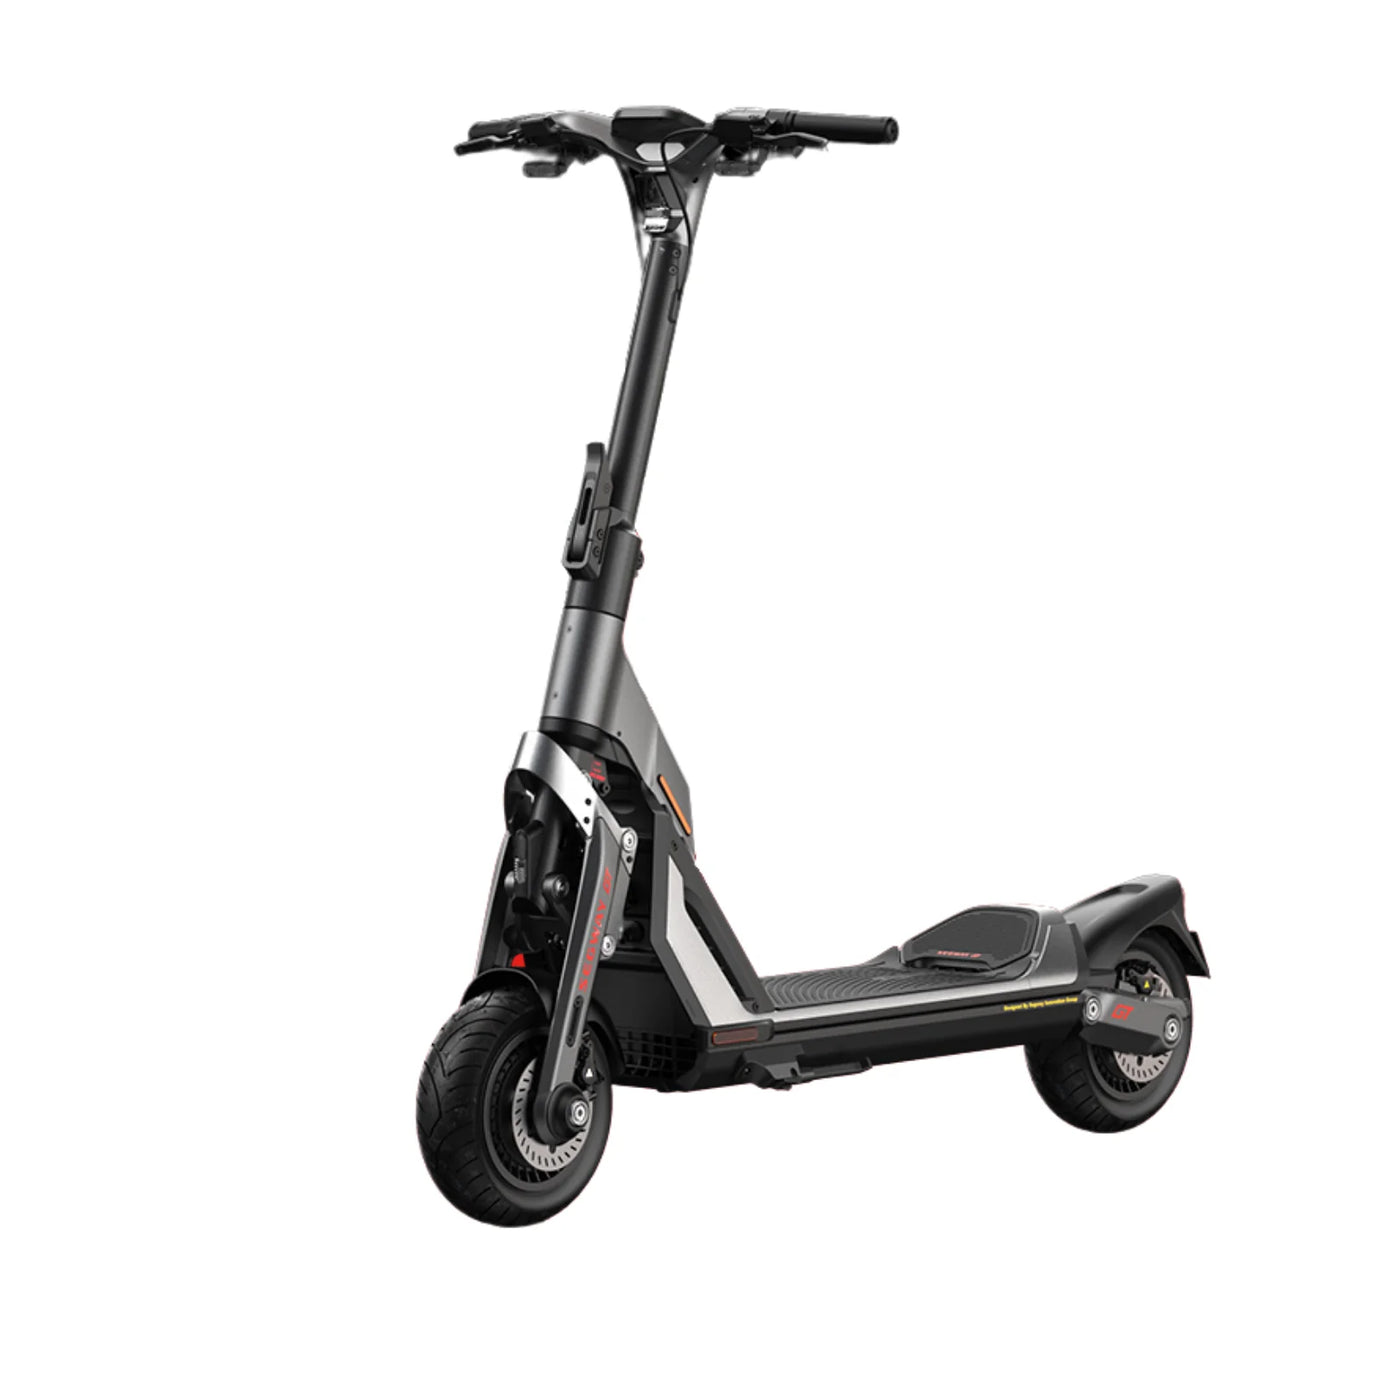 Segway-Ninebot GT1 Electric Scooter 6 Months Free Service